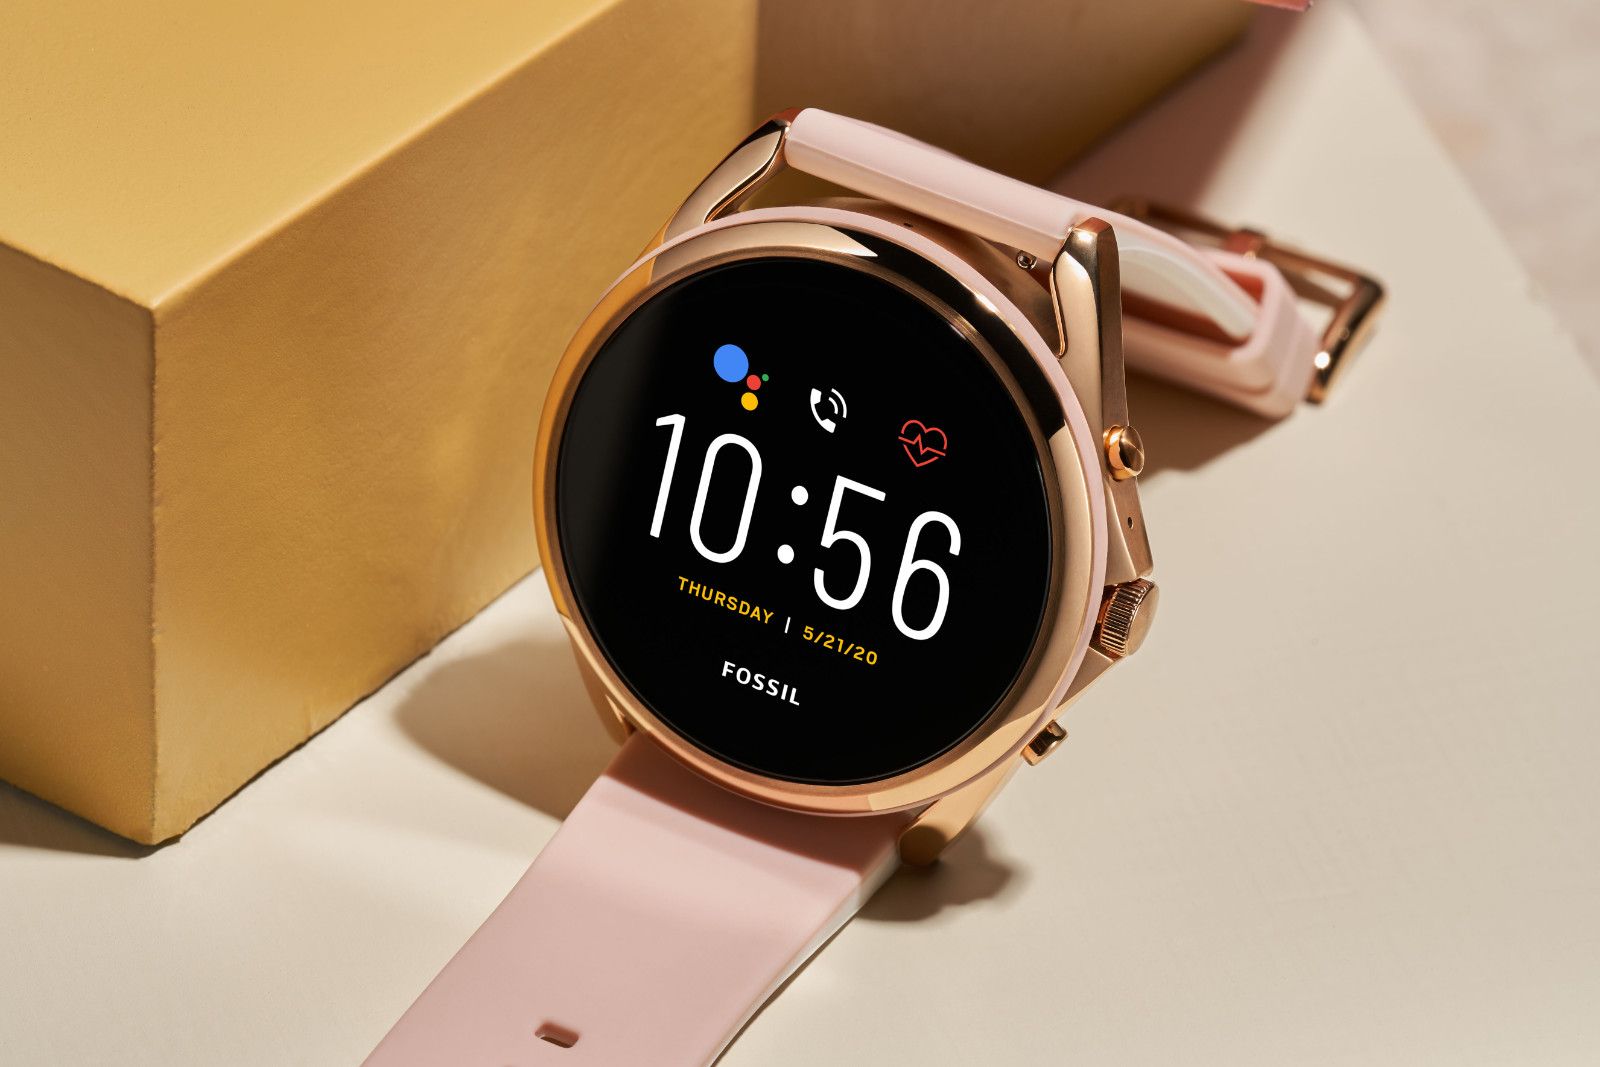 Fossil's first LTE Gen 5 smartwatch now in the UK